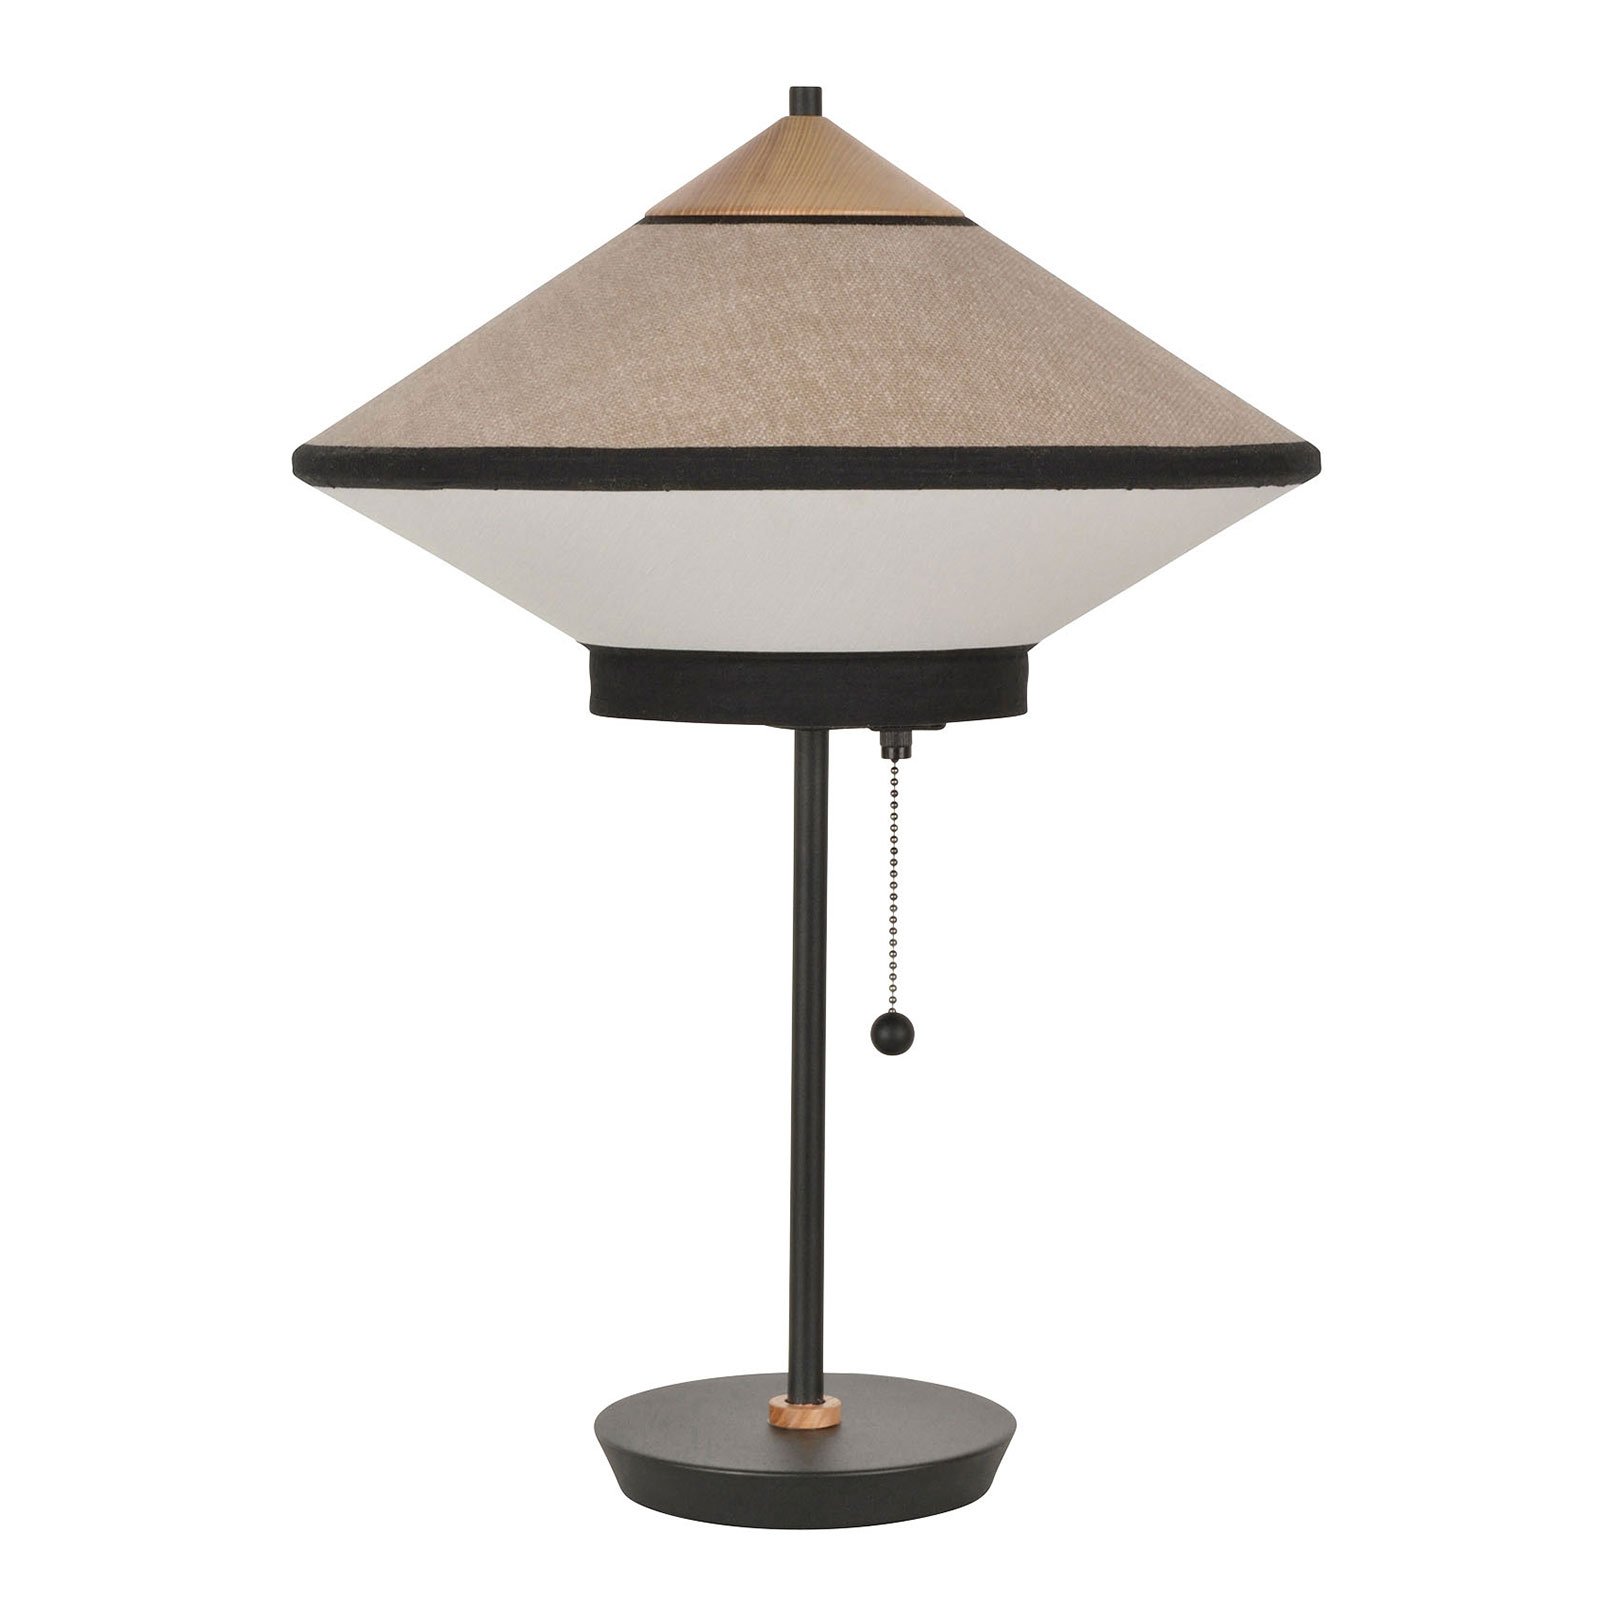 Stolna lampa Forestier Cymbal S, natur